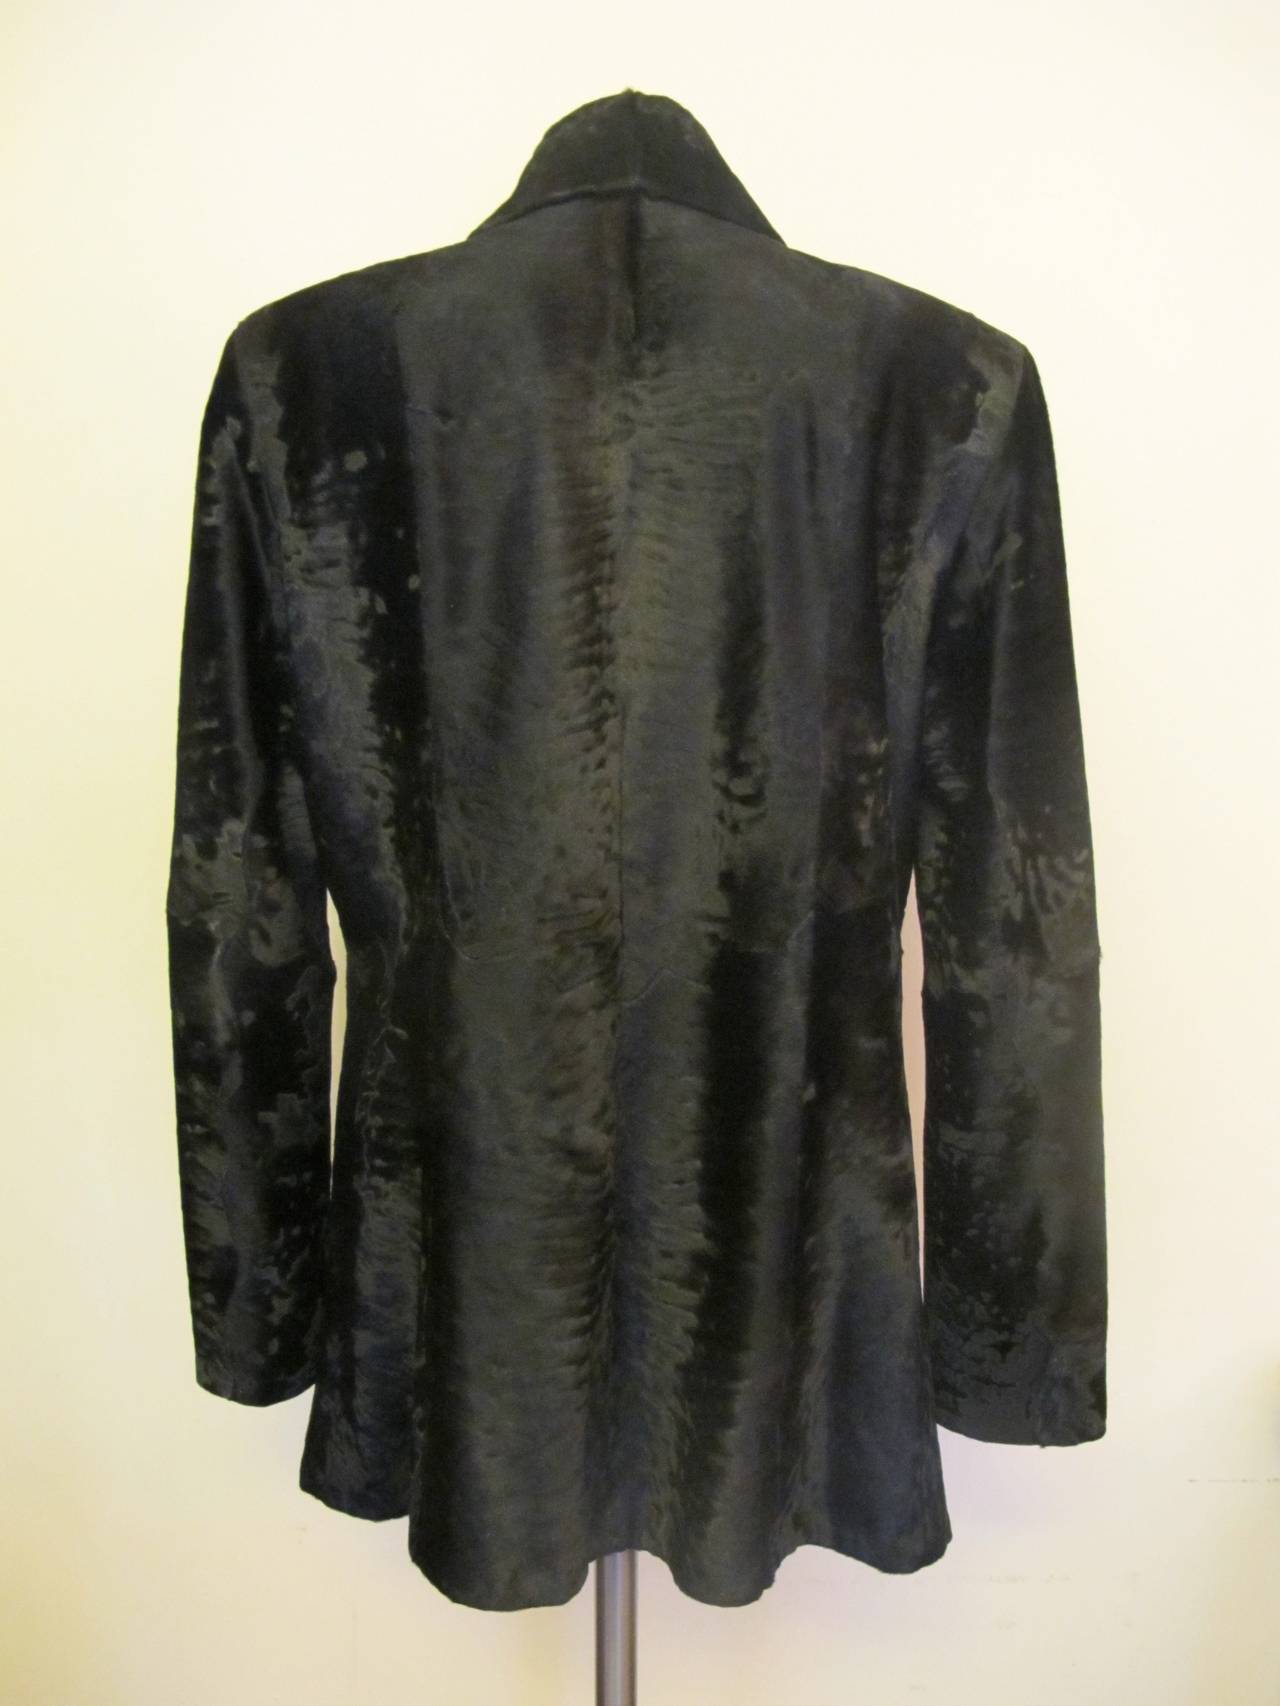 Giuliana Teso Black Broadtail Jacket for Neiman Marcus For Sale 2